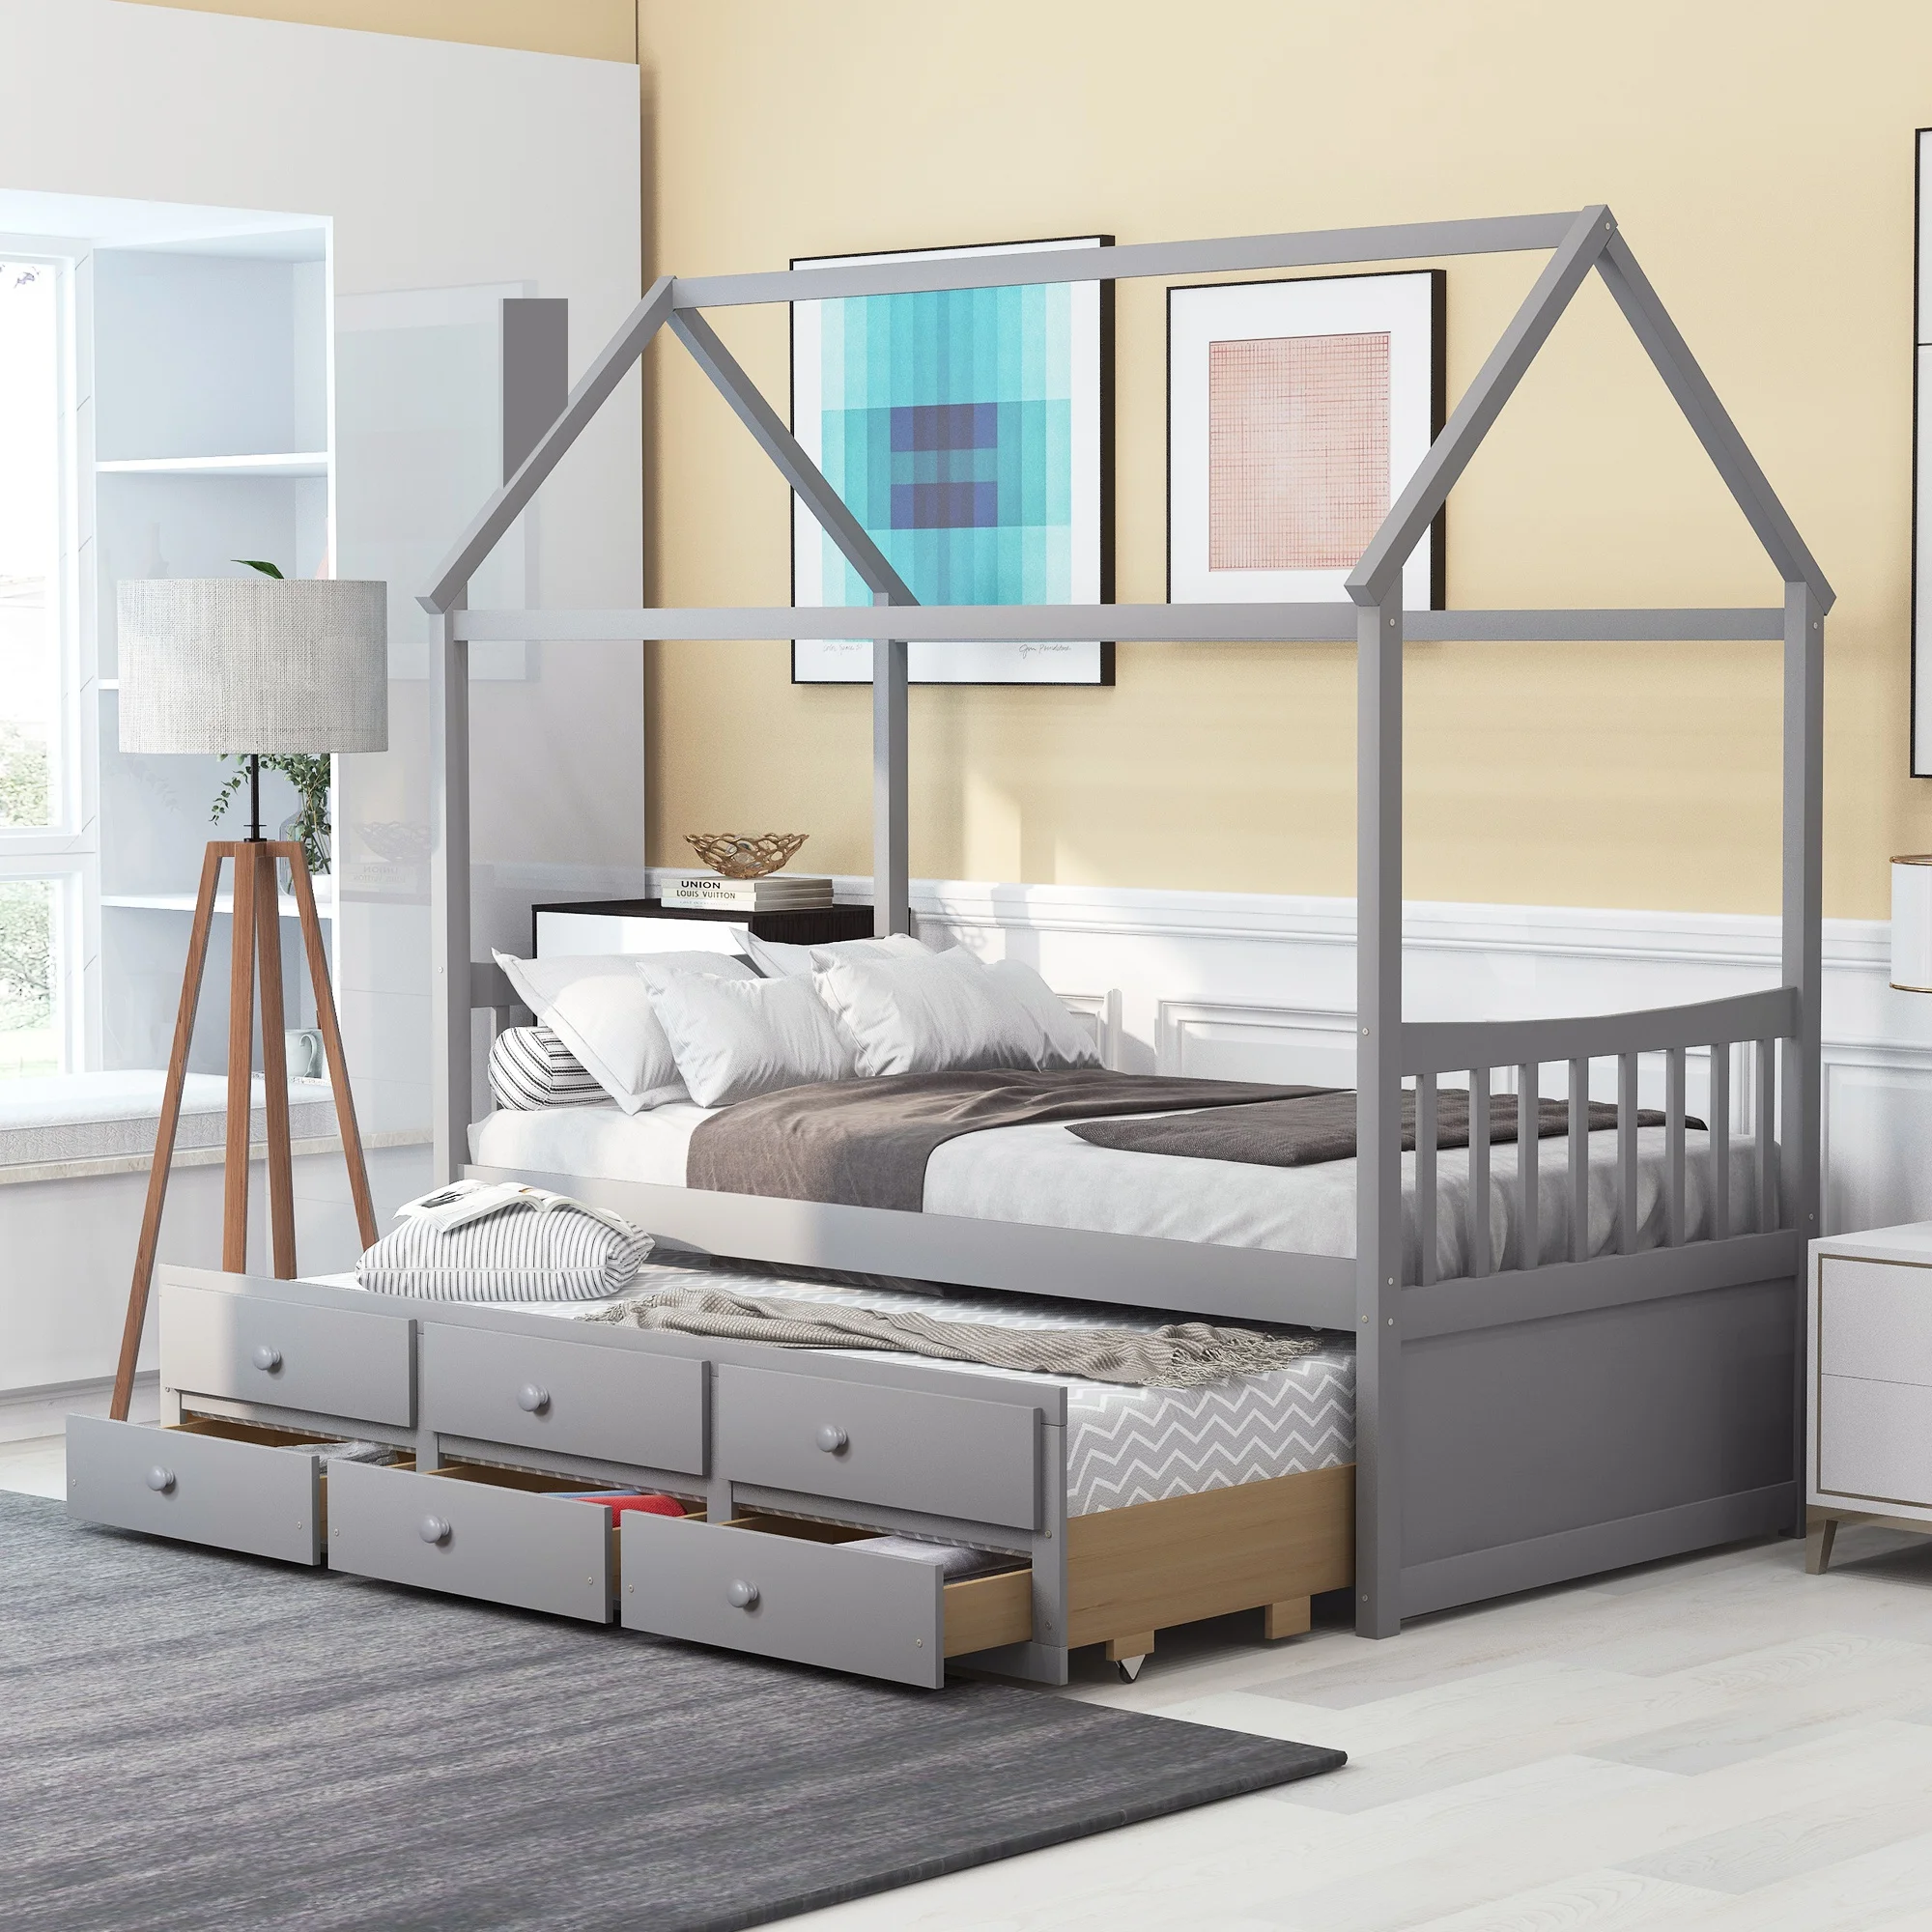 

Home Modern Minimalist Wooden Bedroom Furniture Beds Frames Bases Twin Size Wooden House Bed With Trundle 3 Storage Drawers Gray